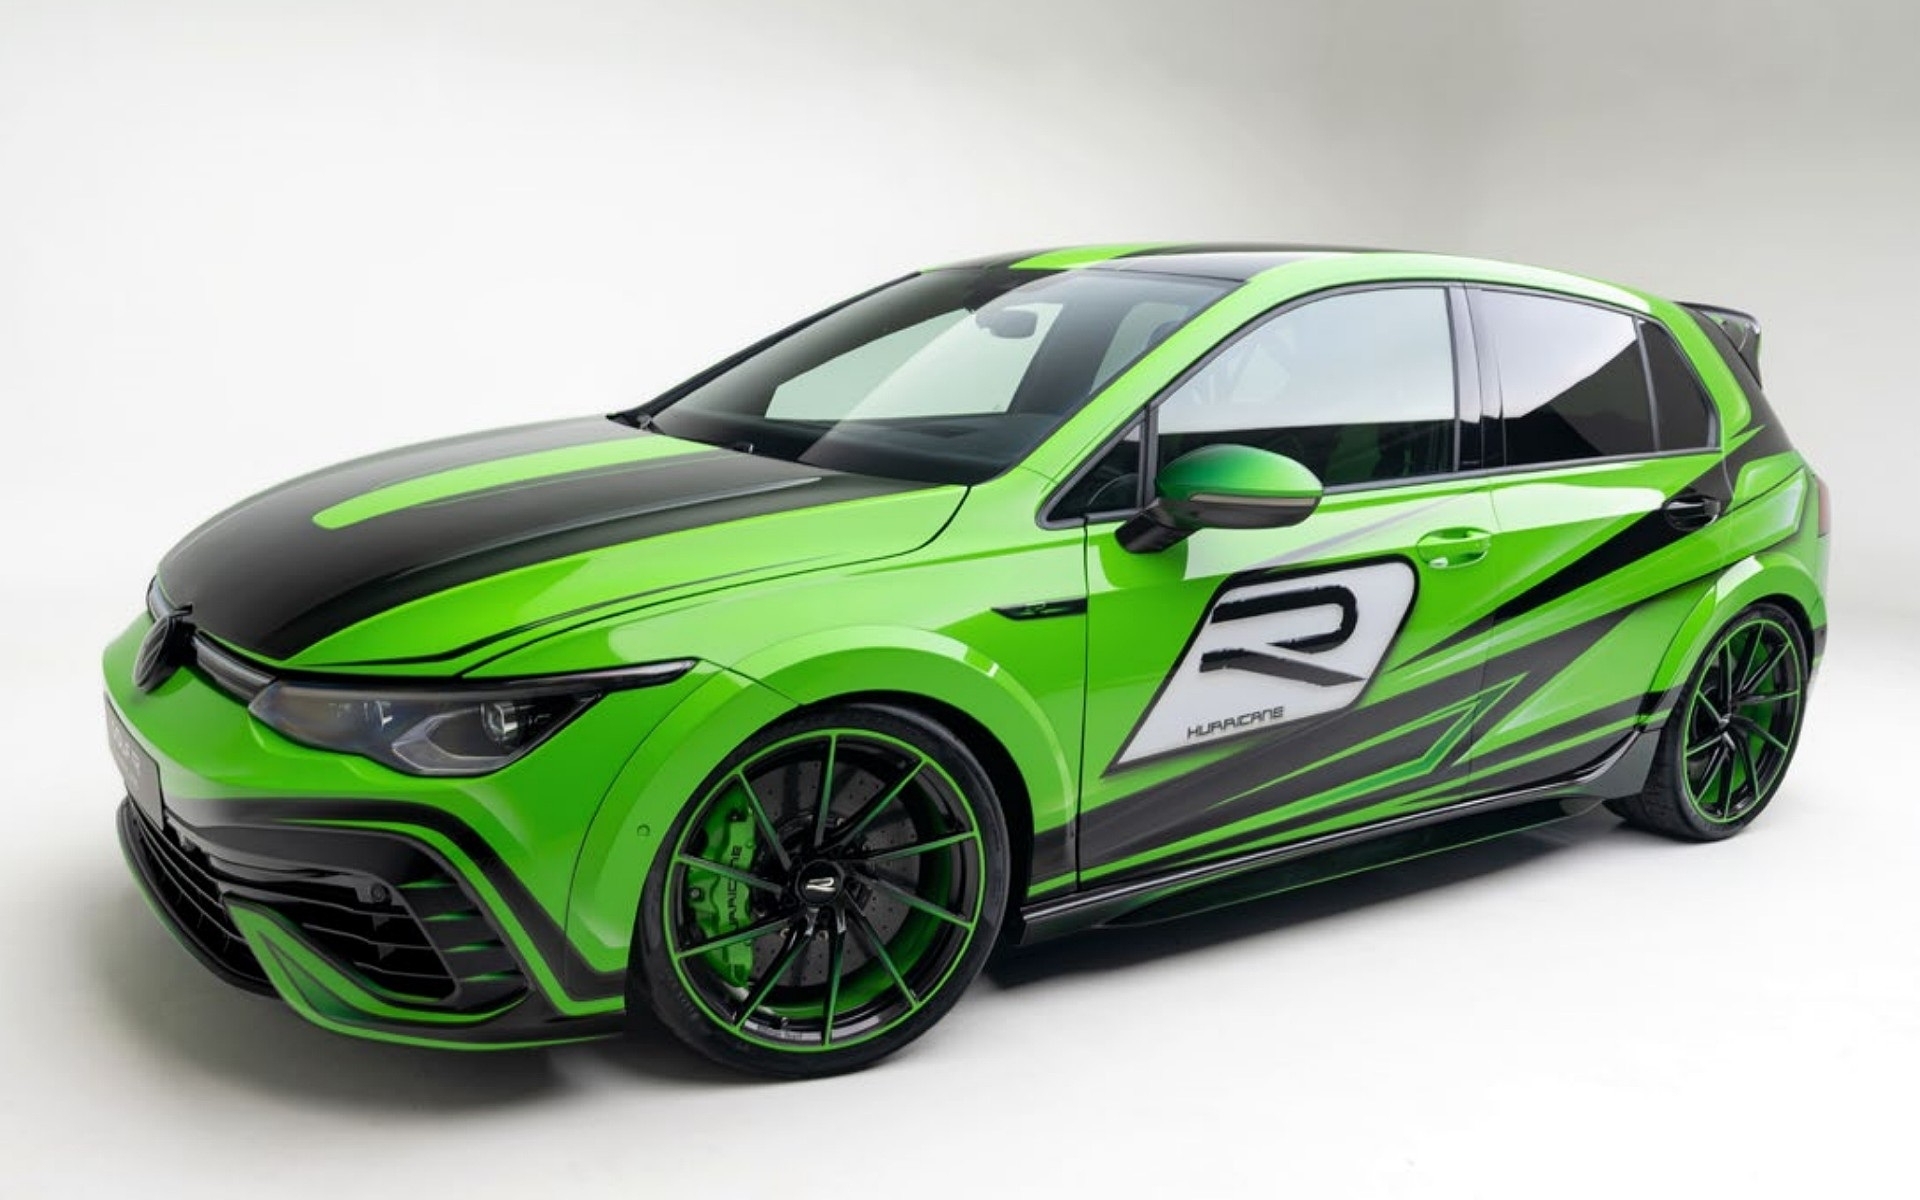 Hurricane, the 526 hp Golf R created by Volkswagen to become the terror of the Autobahn